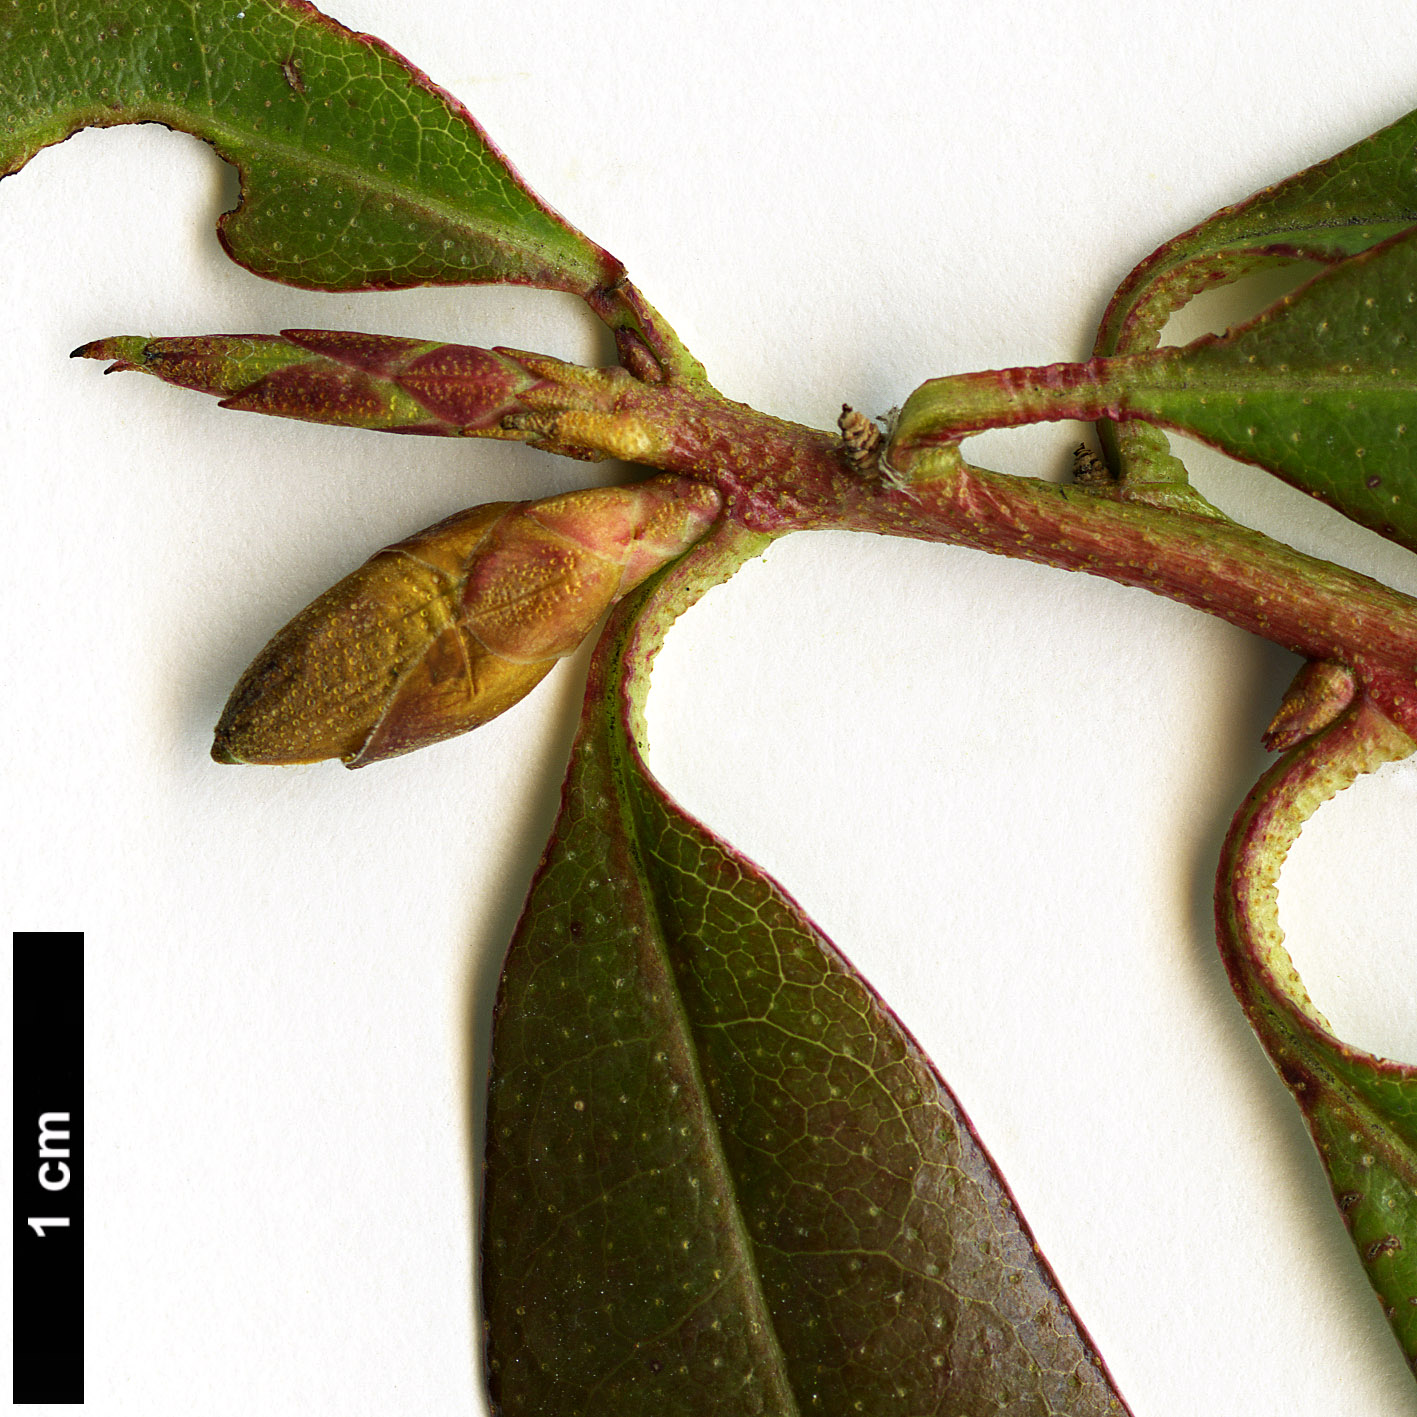 High resolution image: Family: Ericaceae - Genus: Rhododendron - Taxon: lutescens